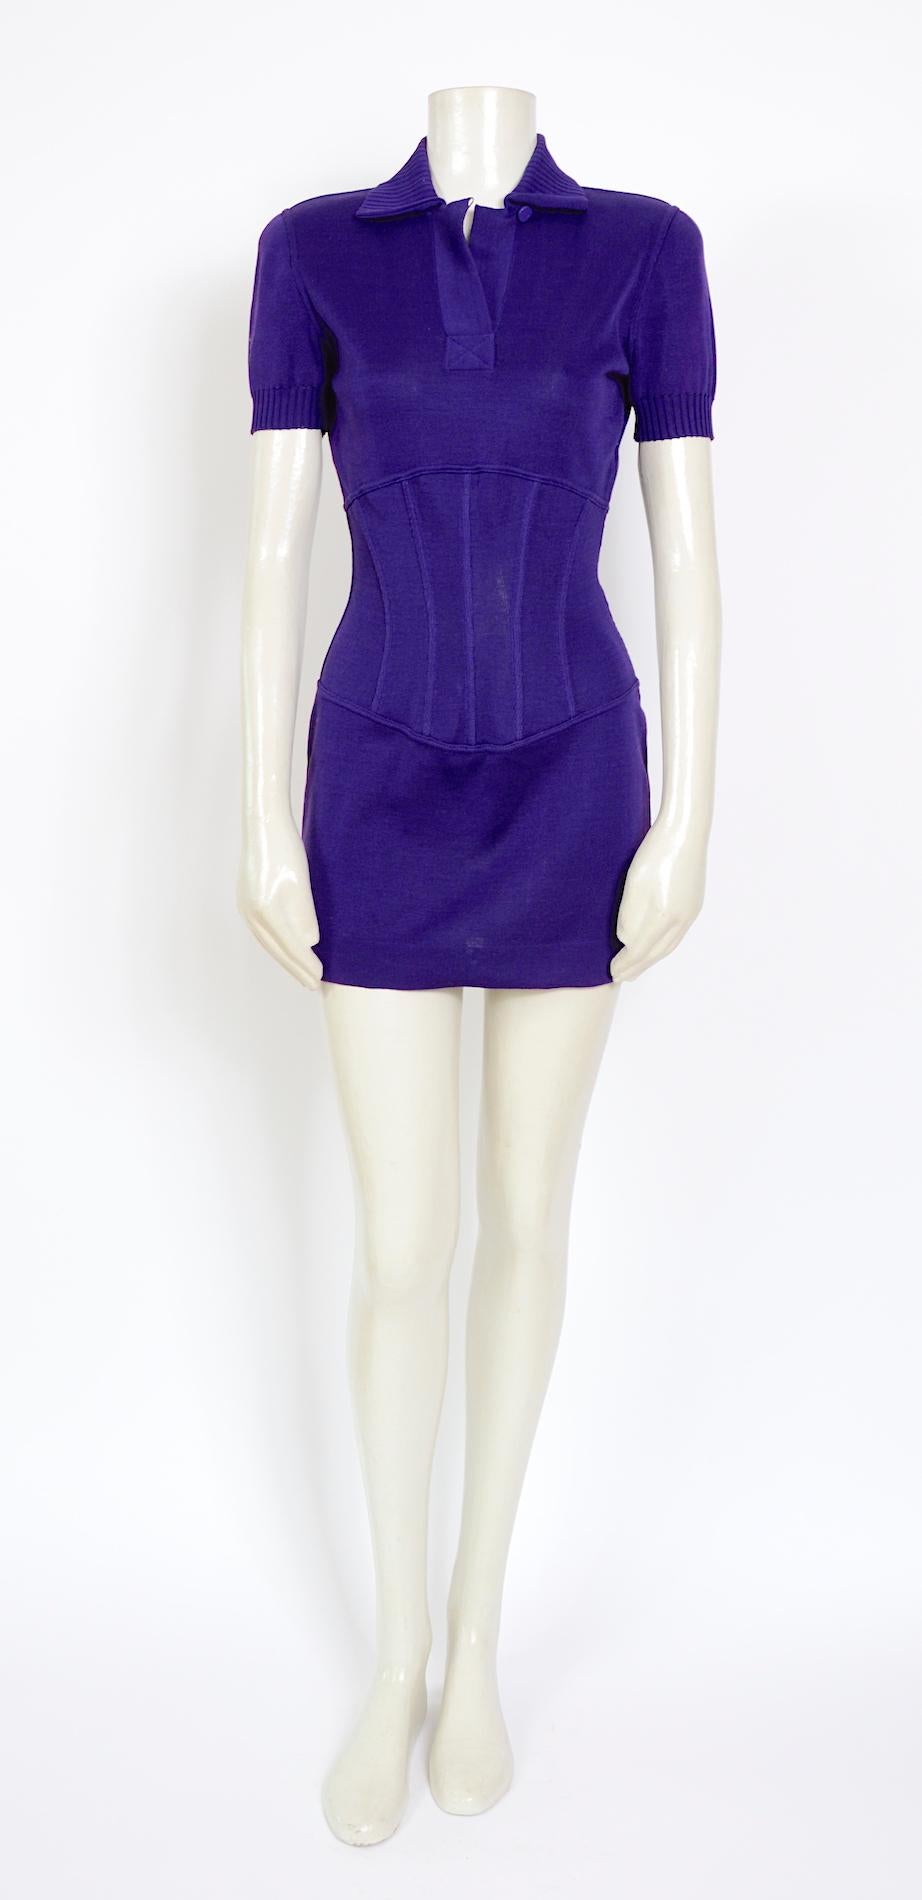 Beautiful vintage spring/summer 1995 cotton jersey corset mini dress by Karl Lagerfeld.
Made in Italy - size 40 
Measurements are taken flat: Sh to Sh 15inch/38cm - Ua to Ua 17inch/43cm(x2) - Waist 12inch/31cm(x2) - Hip 17inch/43cm(x2) - Total